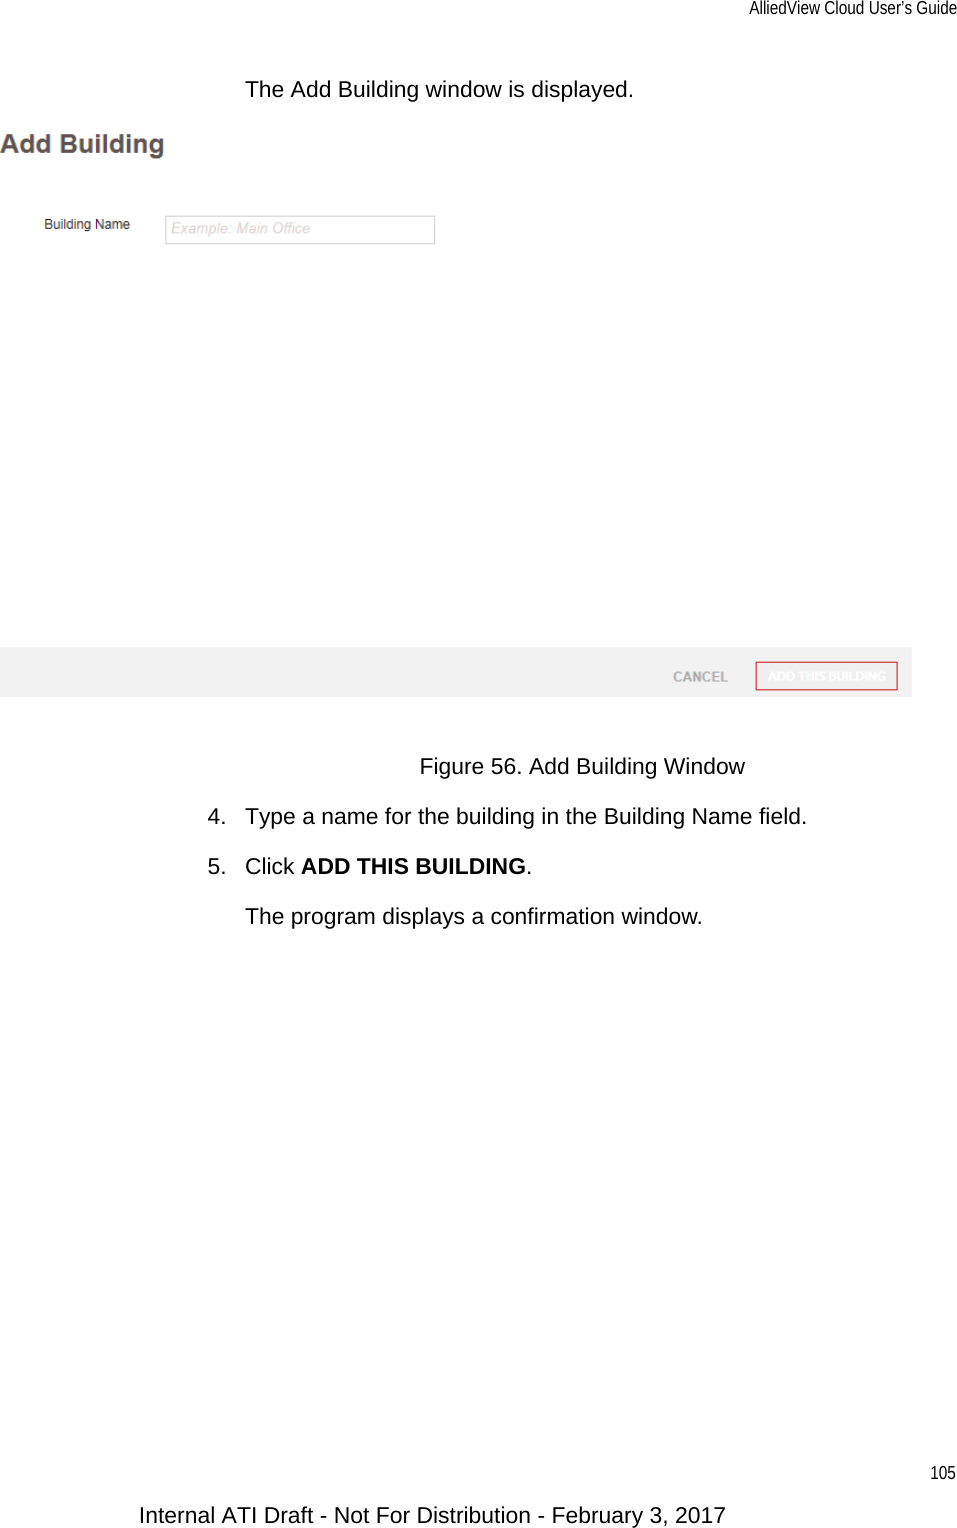 AlliedView Cloud User’s Guide105The Add Building window is displayed.Figure 56. Add Building Window4. Type a name for the building in the Building Name field.5. Click ADD THIS BUILDING.The program displays a confirmation window.Internal ATI Draft - Not For Distribution - February 3, 2017